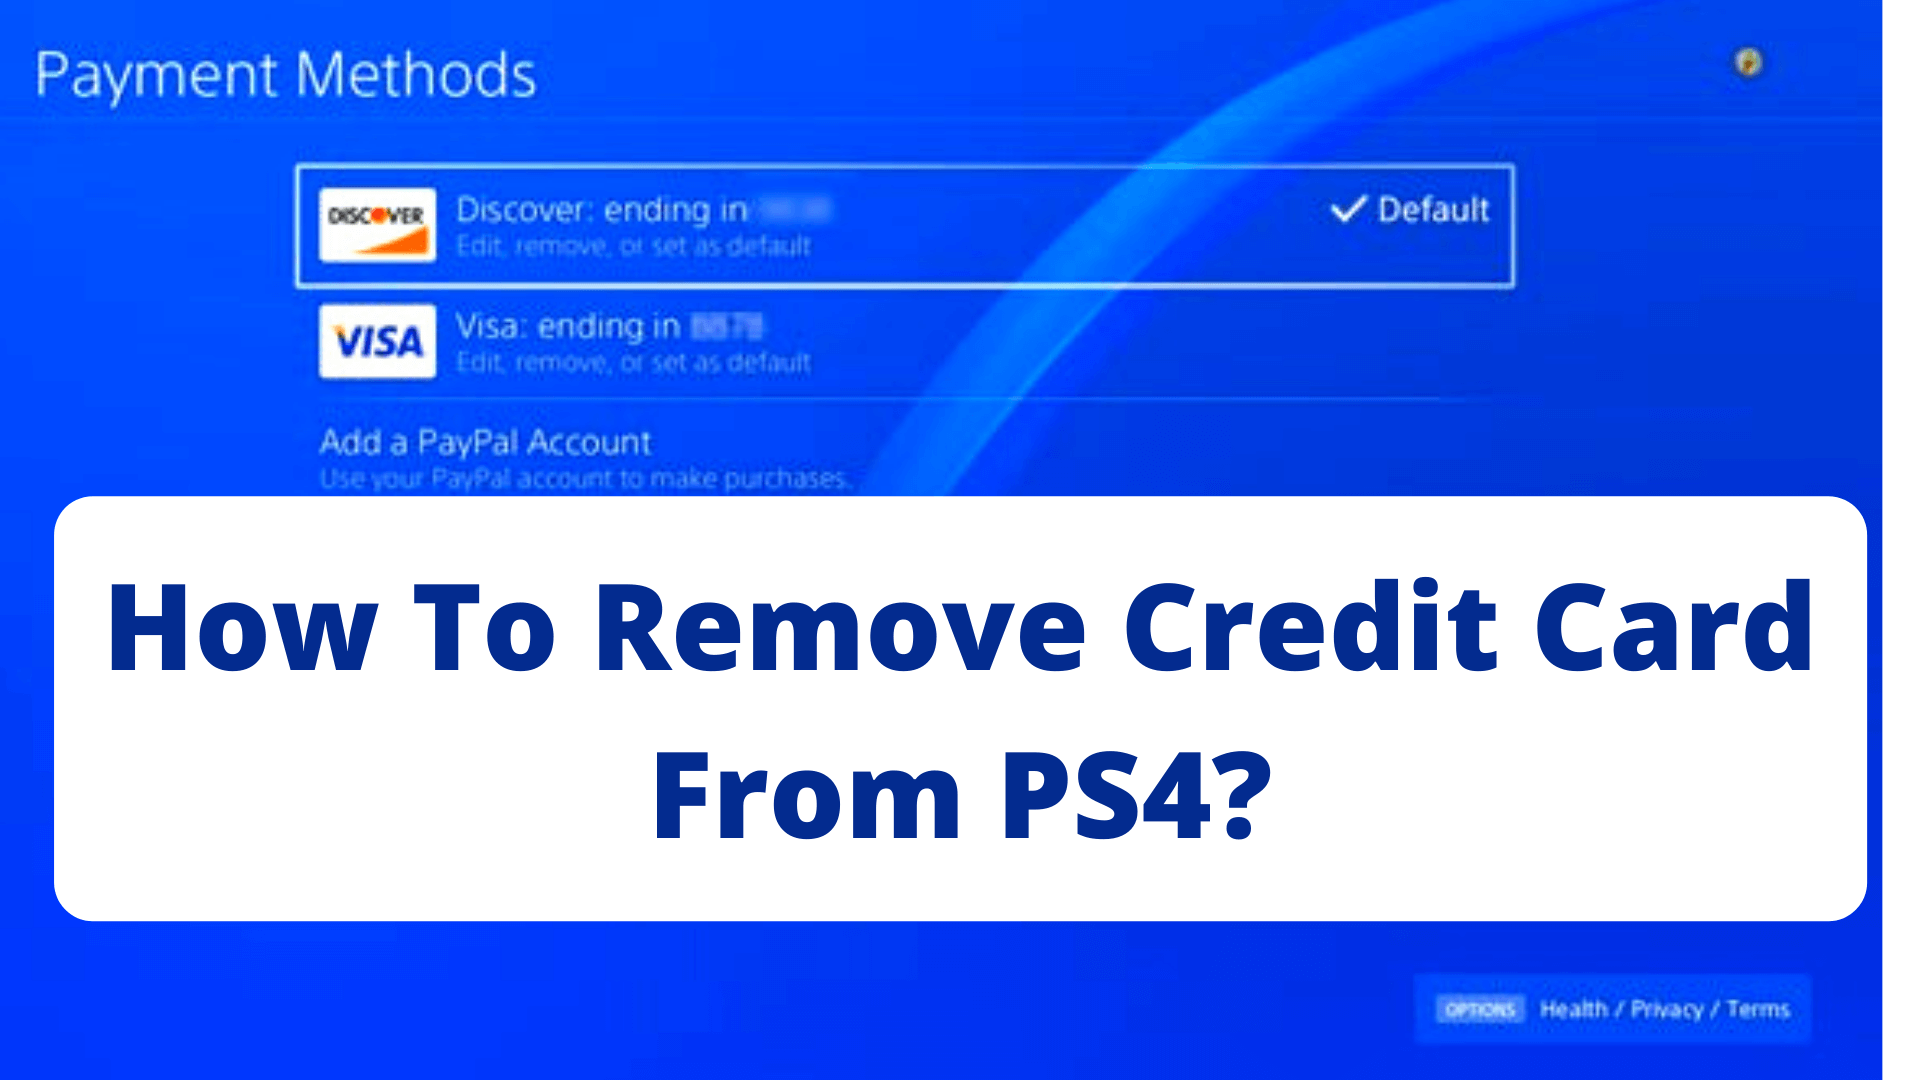 How To Remove Credit Card From PS4